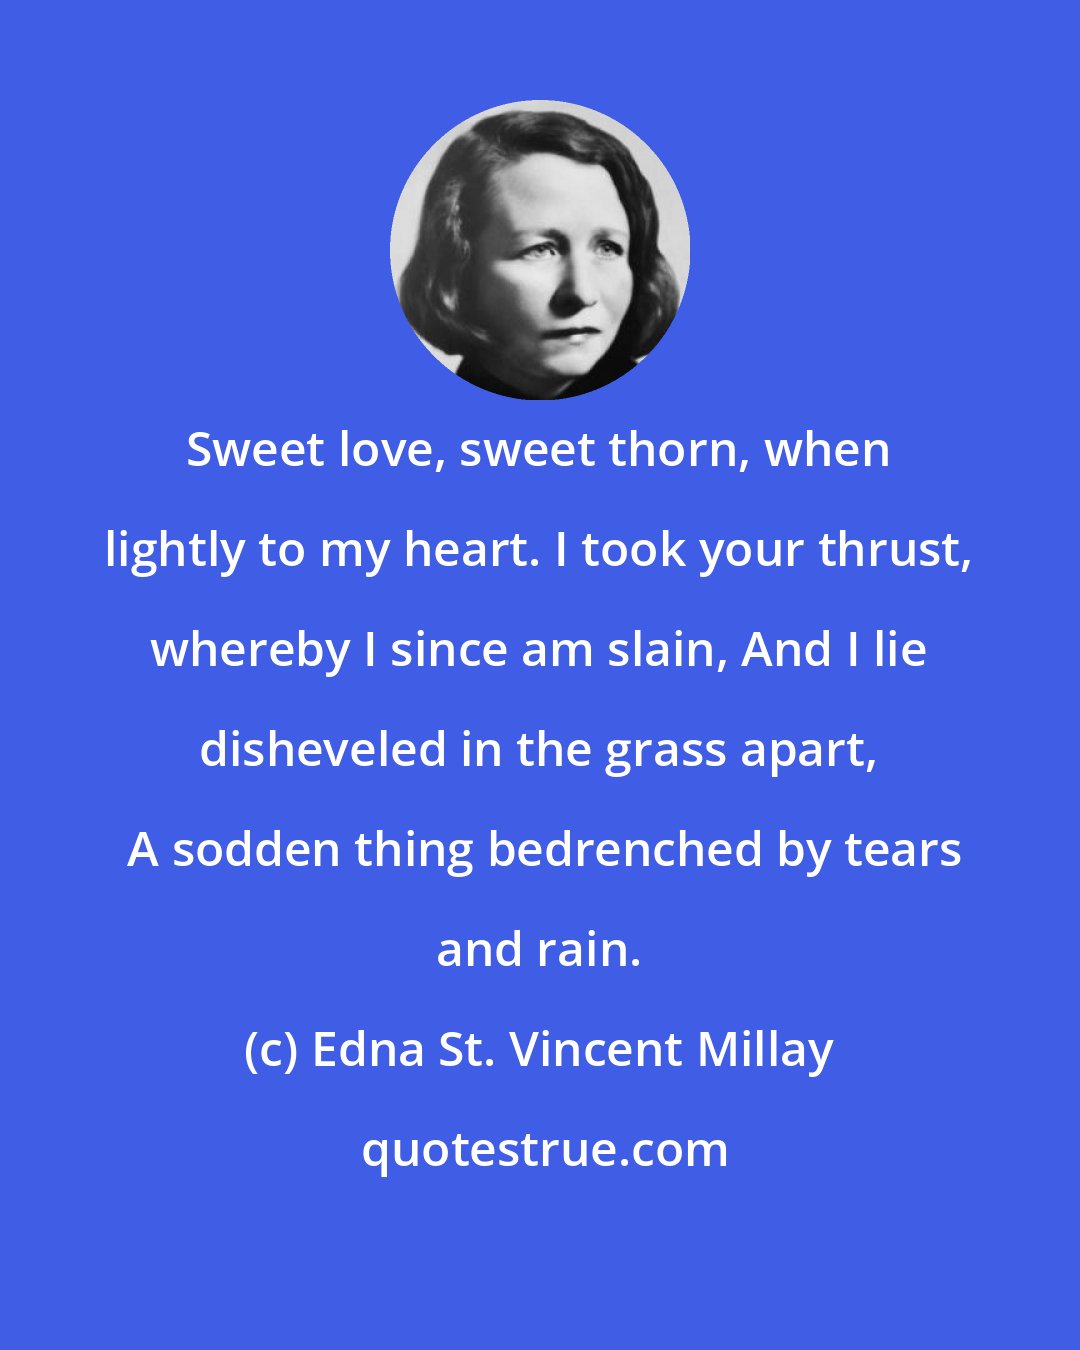 Edna St. Vincent Millay: Sweet love, sweet thorn, when lightly to my heart. I took your thrust, whereby I since am slain, And I lie disheveled in the grass apart,  A sodden thing bedrenched by tears and rain.